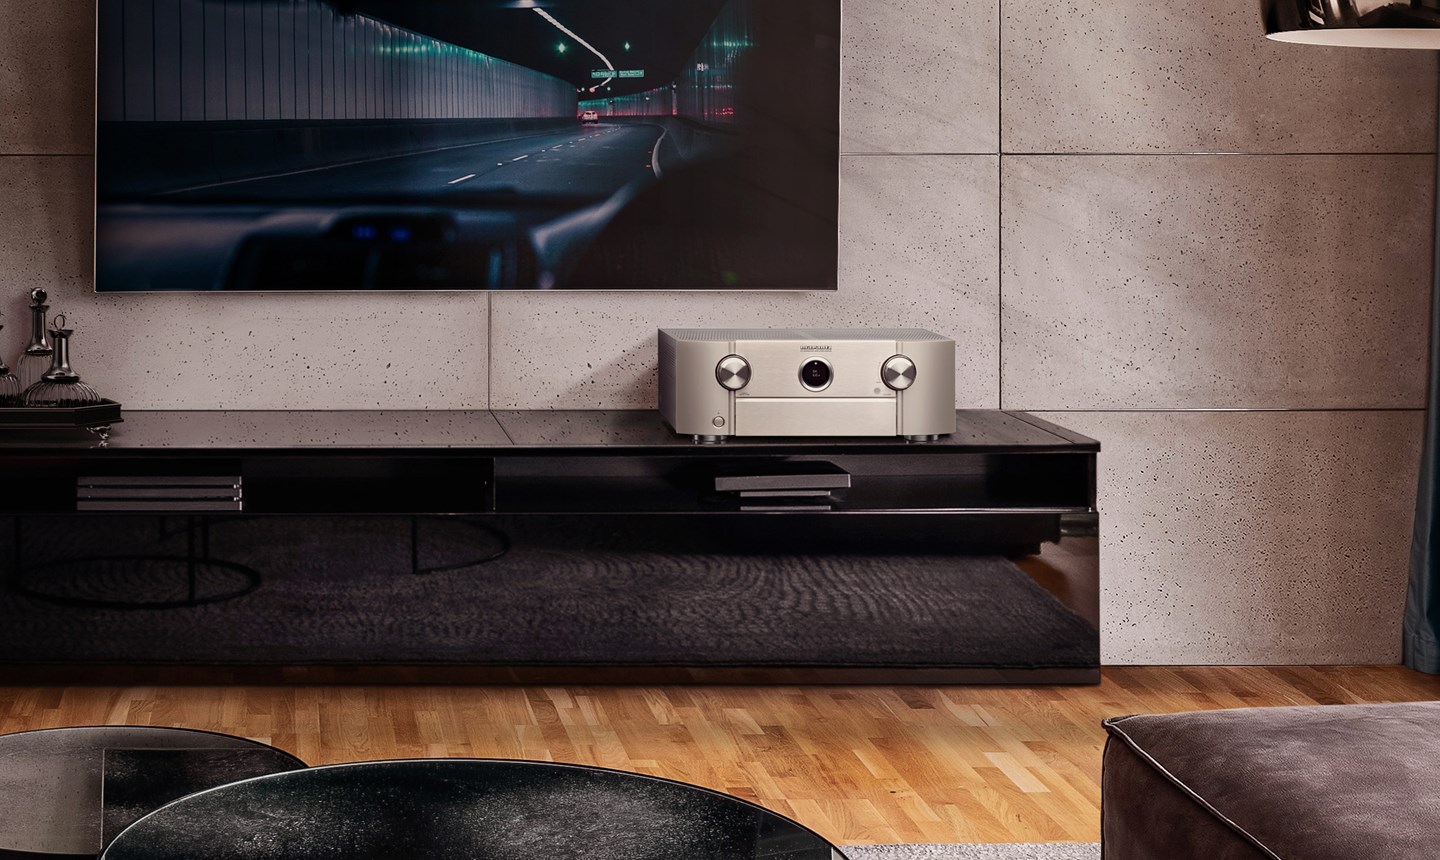 SR6015 Drive exquisitely detailed home cinema with the Marantz SR6015 9.2 channel 8K AV receiver. Enjoy the most musical sound in all your entertainment. Receptores de A/V | Marantz